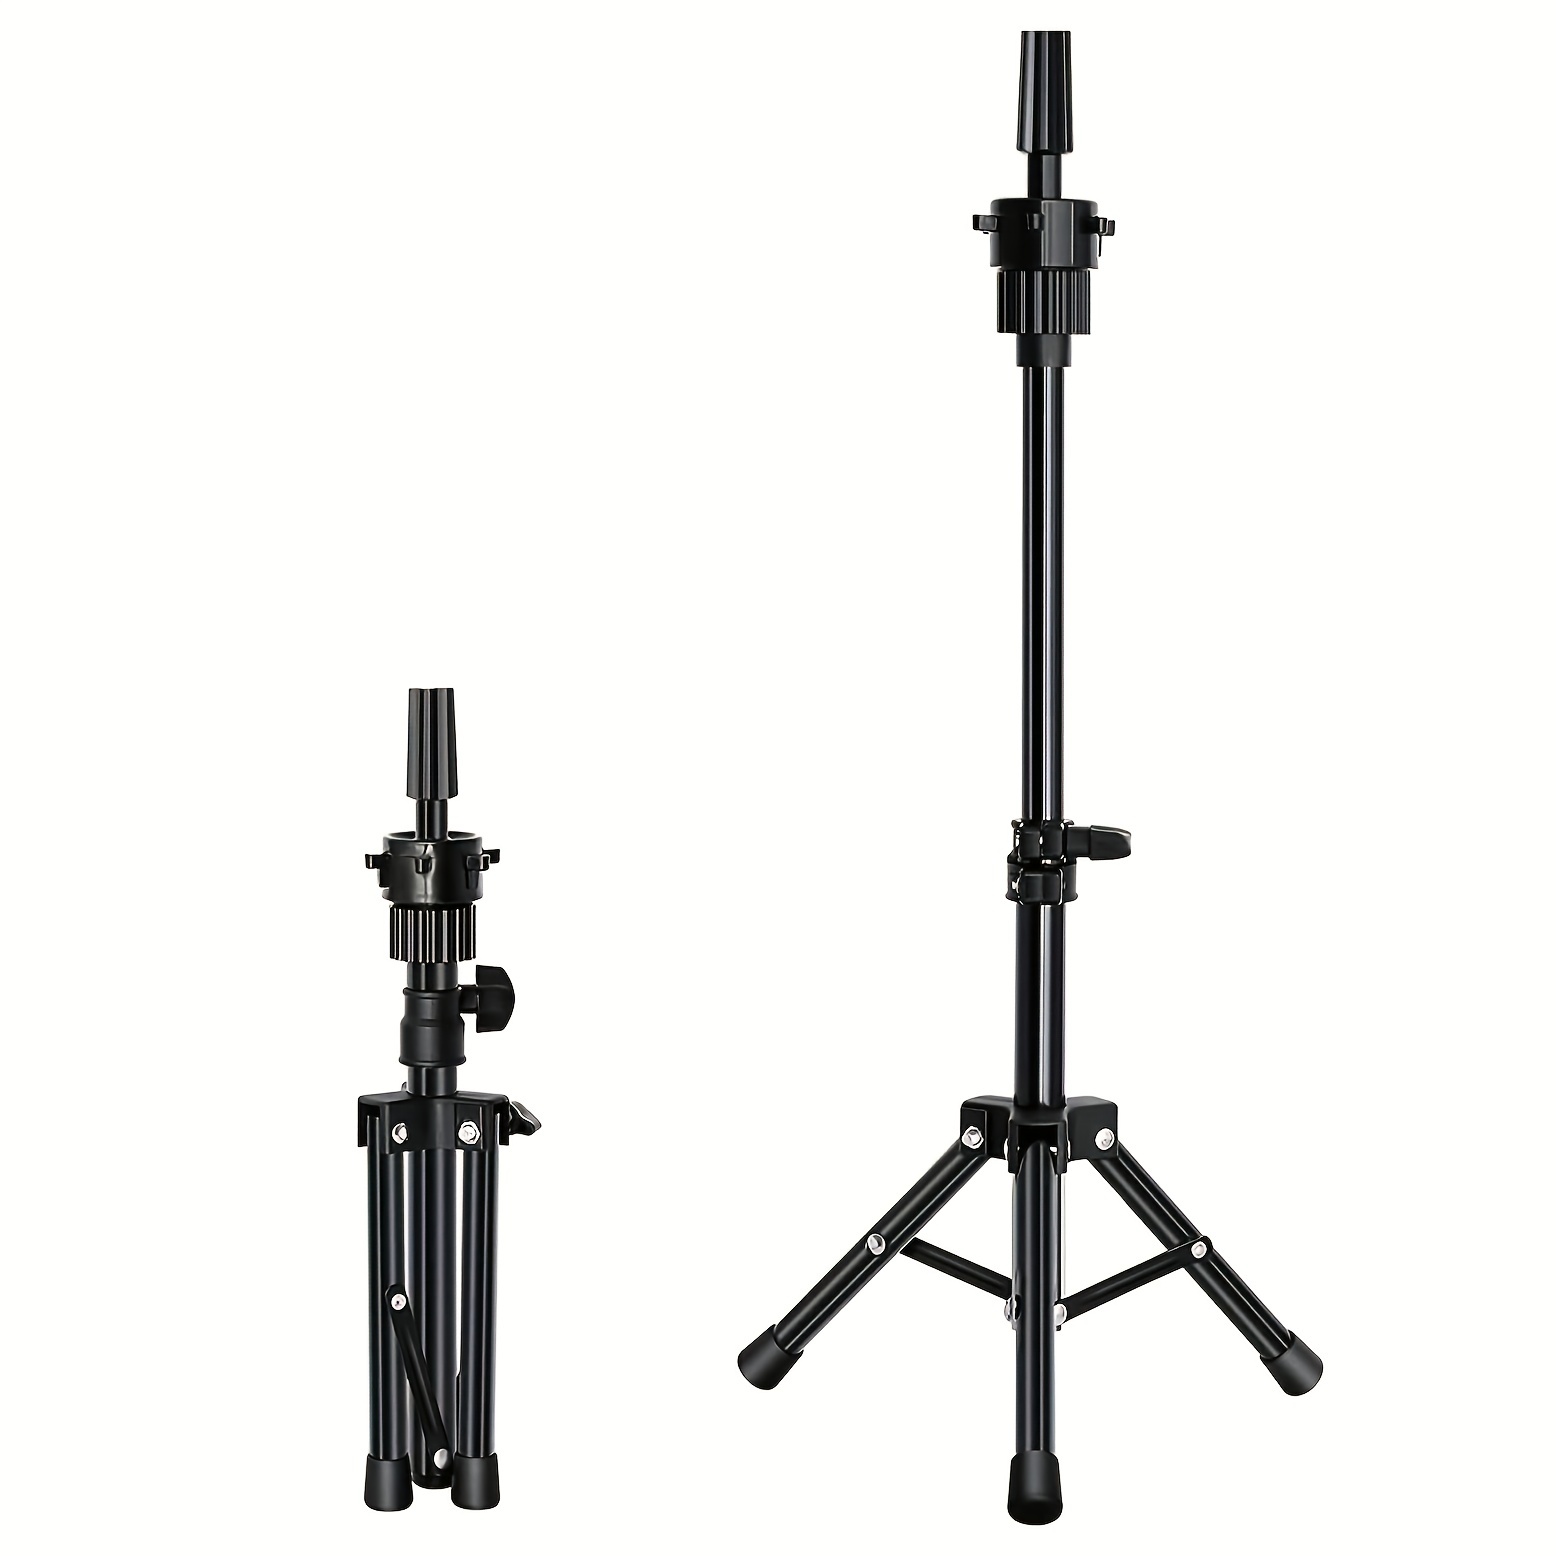 Gex tripod stand available in this sleek black, this particular